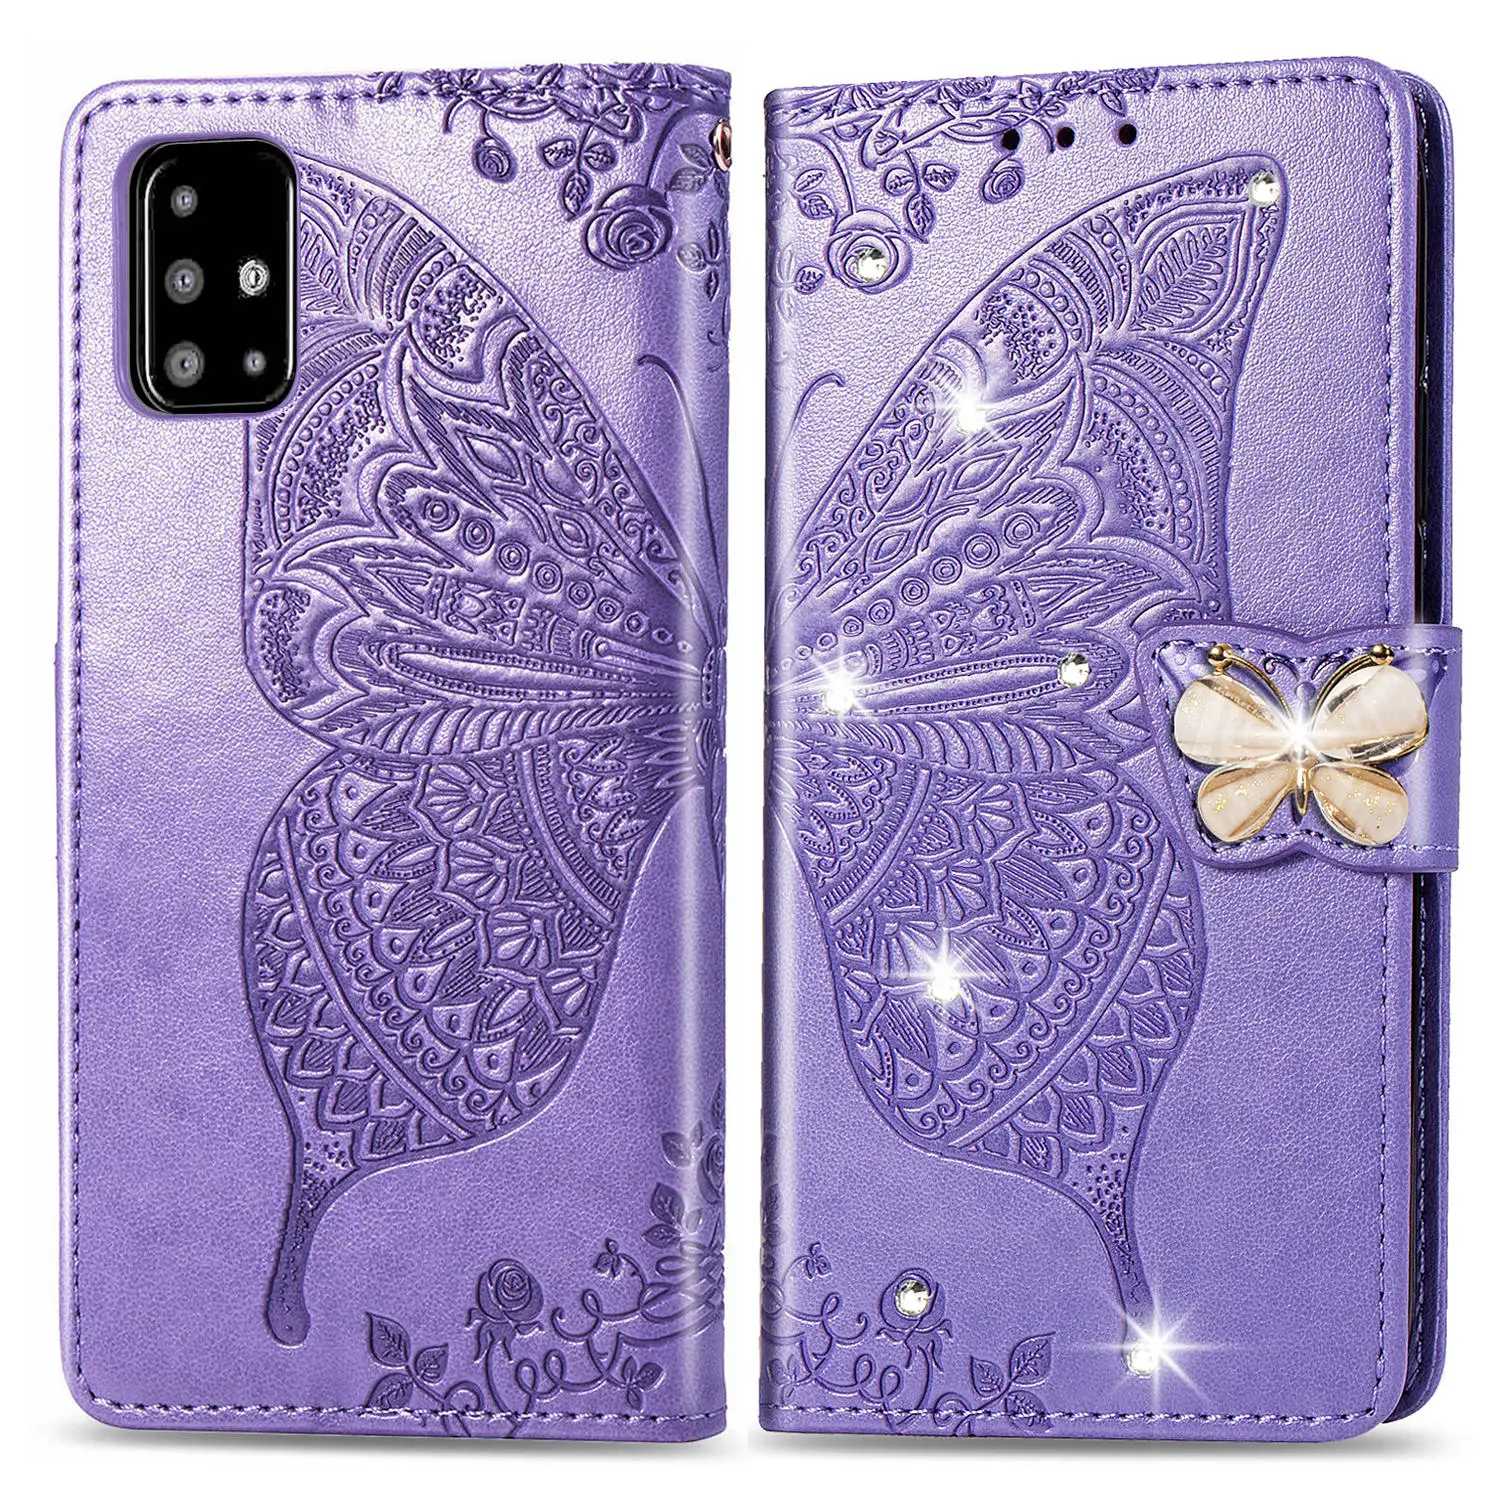 Cute Butterfly Pattern Leather Wallet Phone Case For Samsung Galaxy Phone